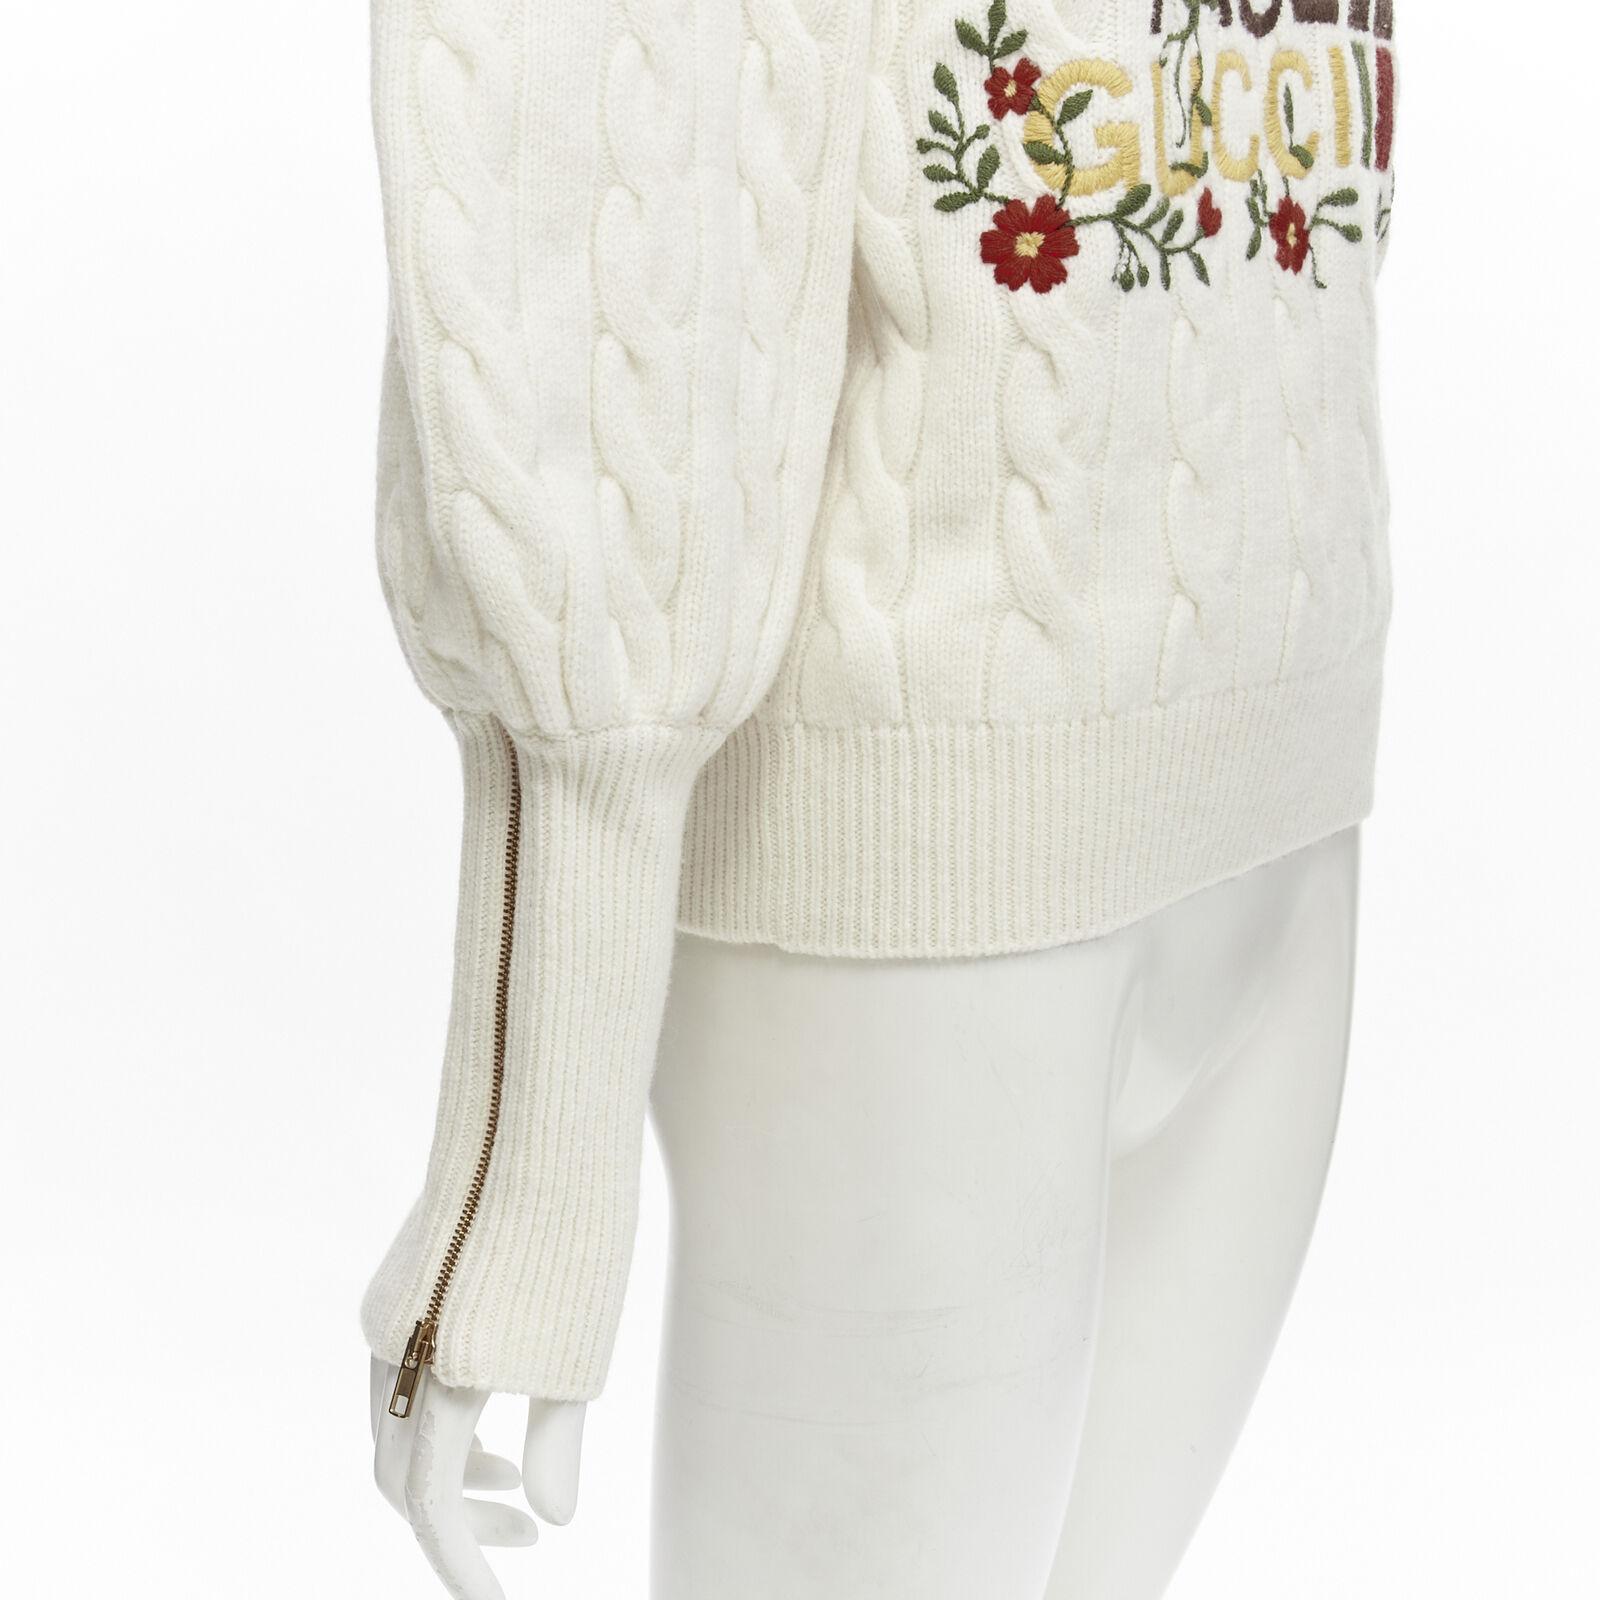 rare GUCCI THE NORTH FACE wool floral logo embroidery cable knit turtleneck XS
Reference: AAWC/A00245
Brand: Gucci
Designer: Alessandro Michele
Collection: The North Face Drop 2
Material: 100% Wool
Color: Beige, Multicolour
Pattern: Floral
Extra